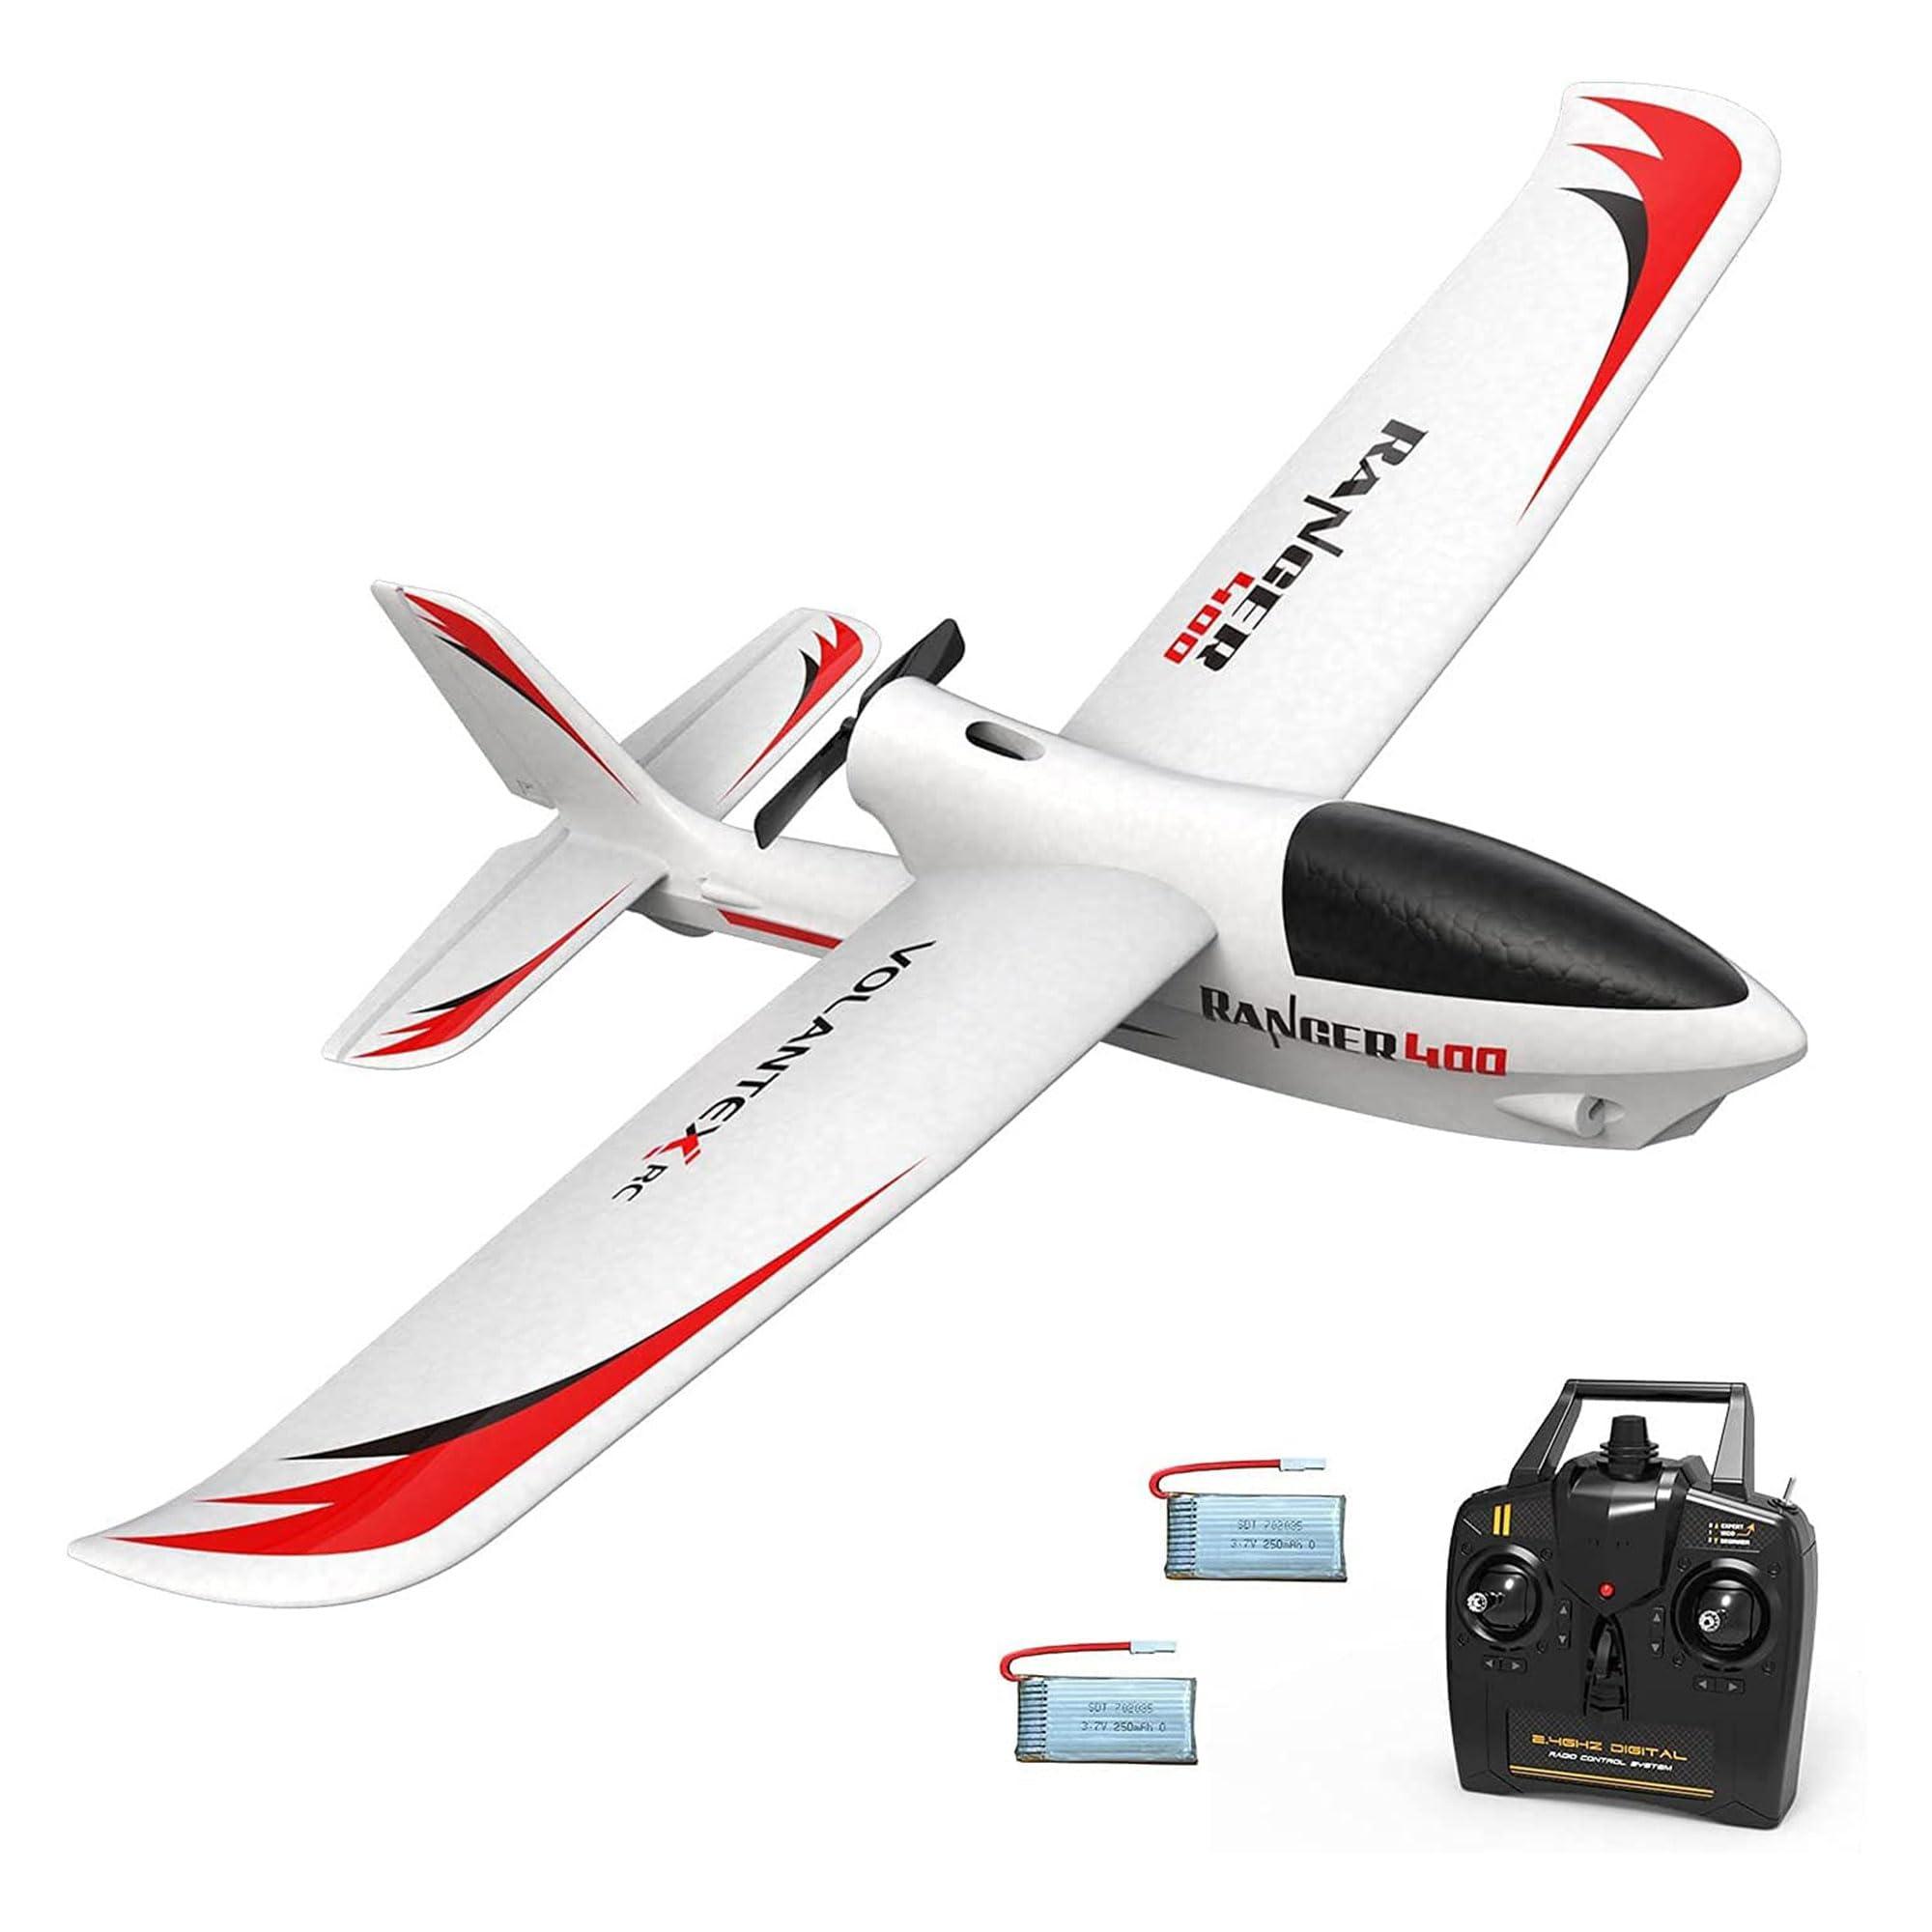 Remote Control Aeroplane Aeroplane: Improving your remote control flying skills: Tips and tricks for success